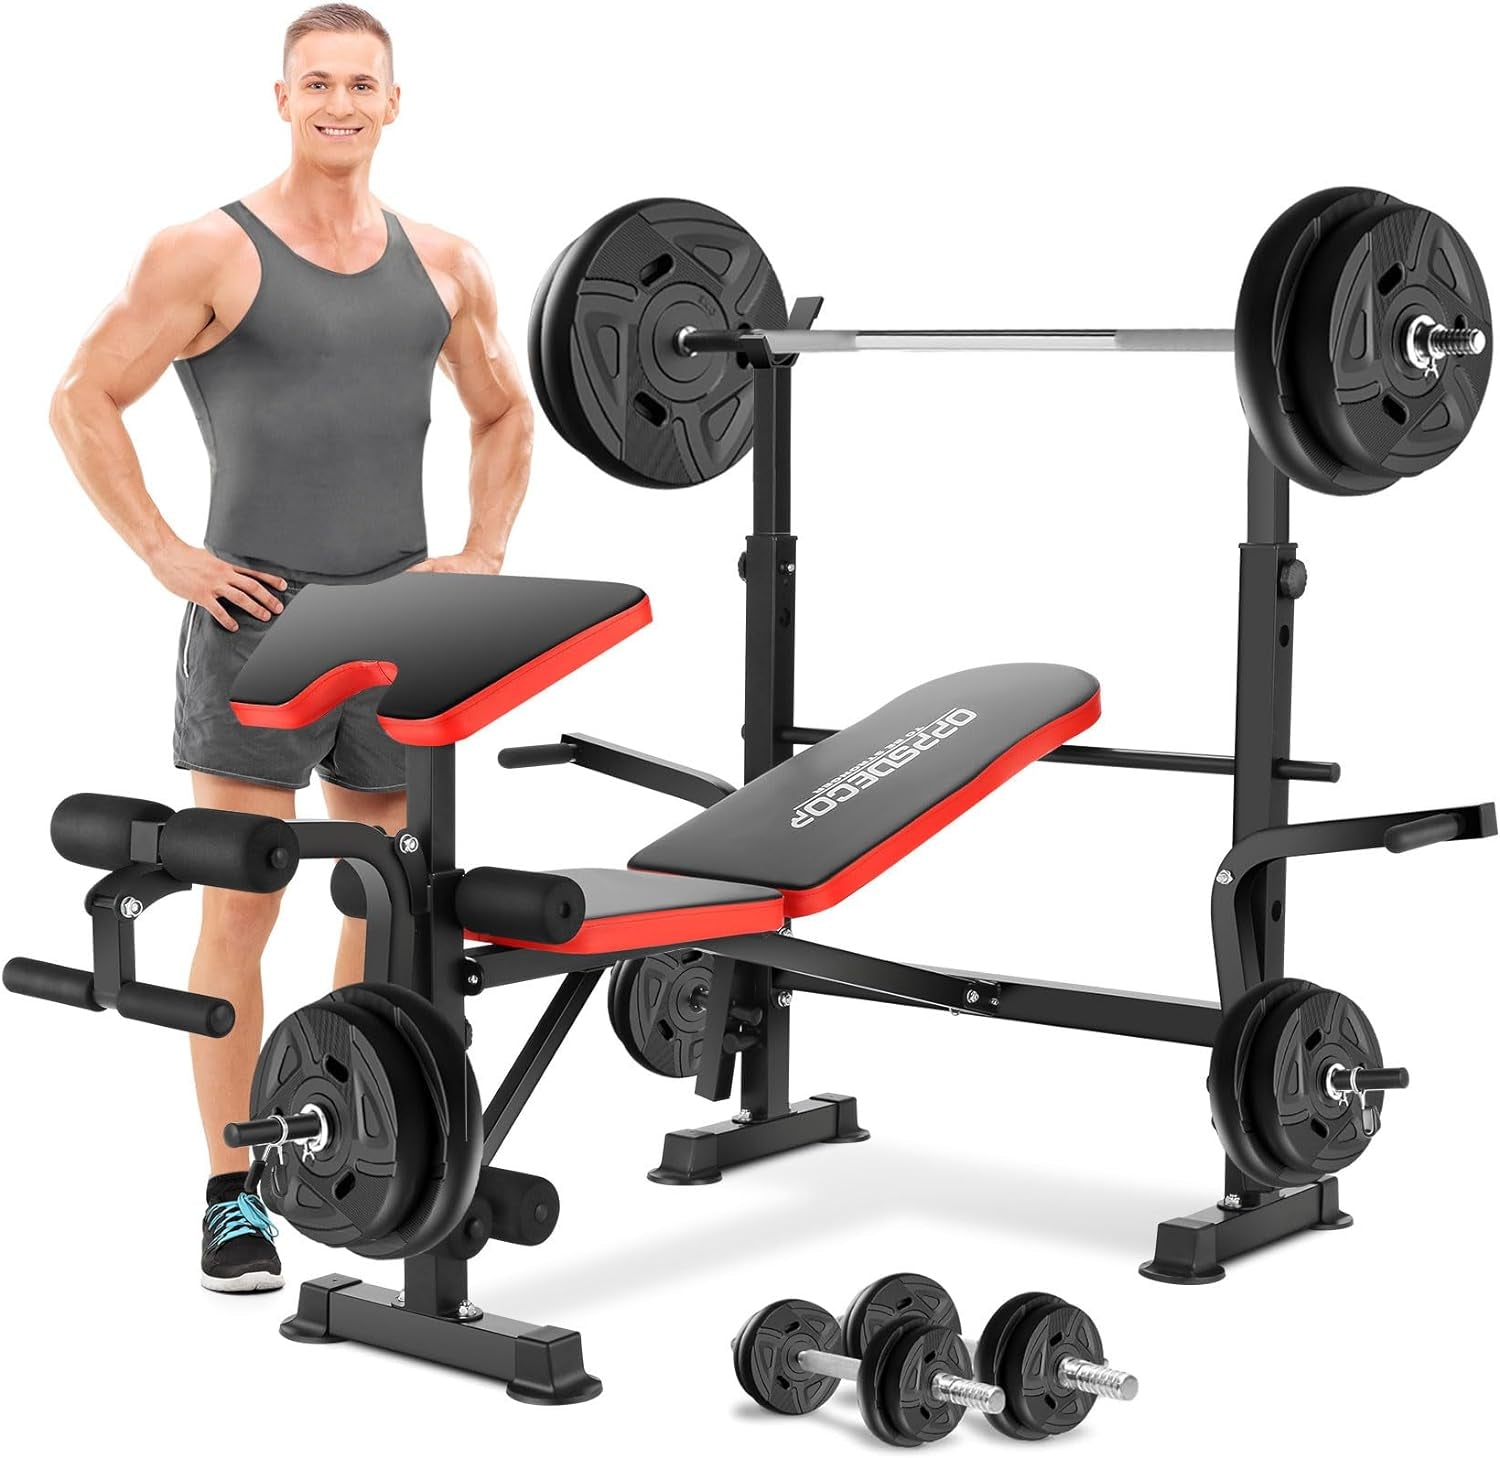 8 in 1 650Lbs Weight Bench Adjustable Workout Bench Set with Squat